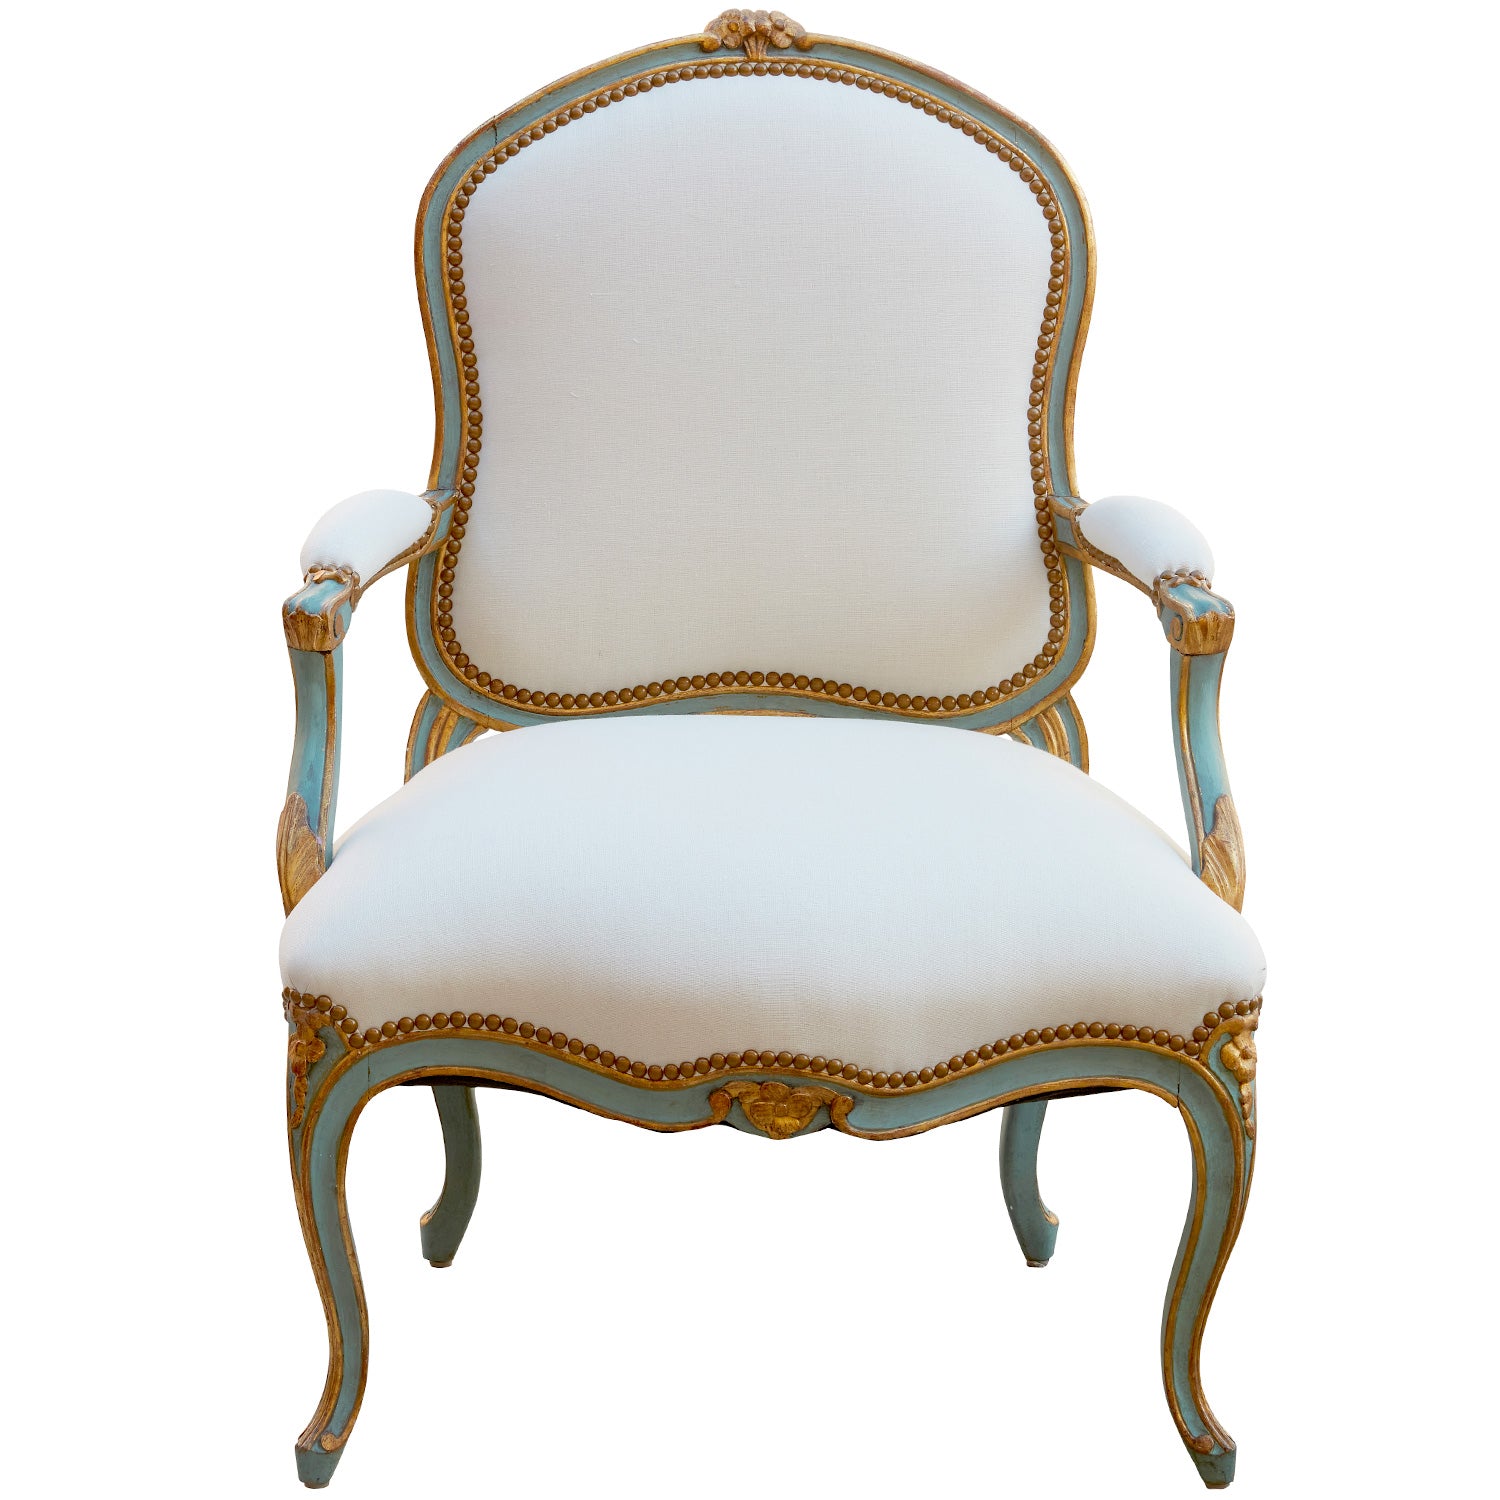 Pair of 18th Century Genoese Rococo Partial Gilt and Painted Fauteuils